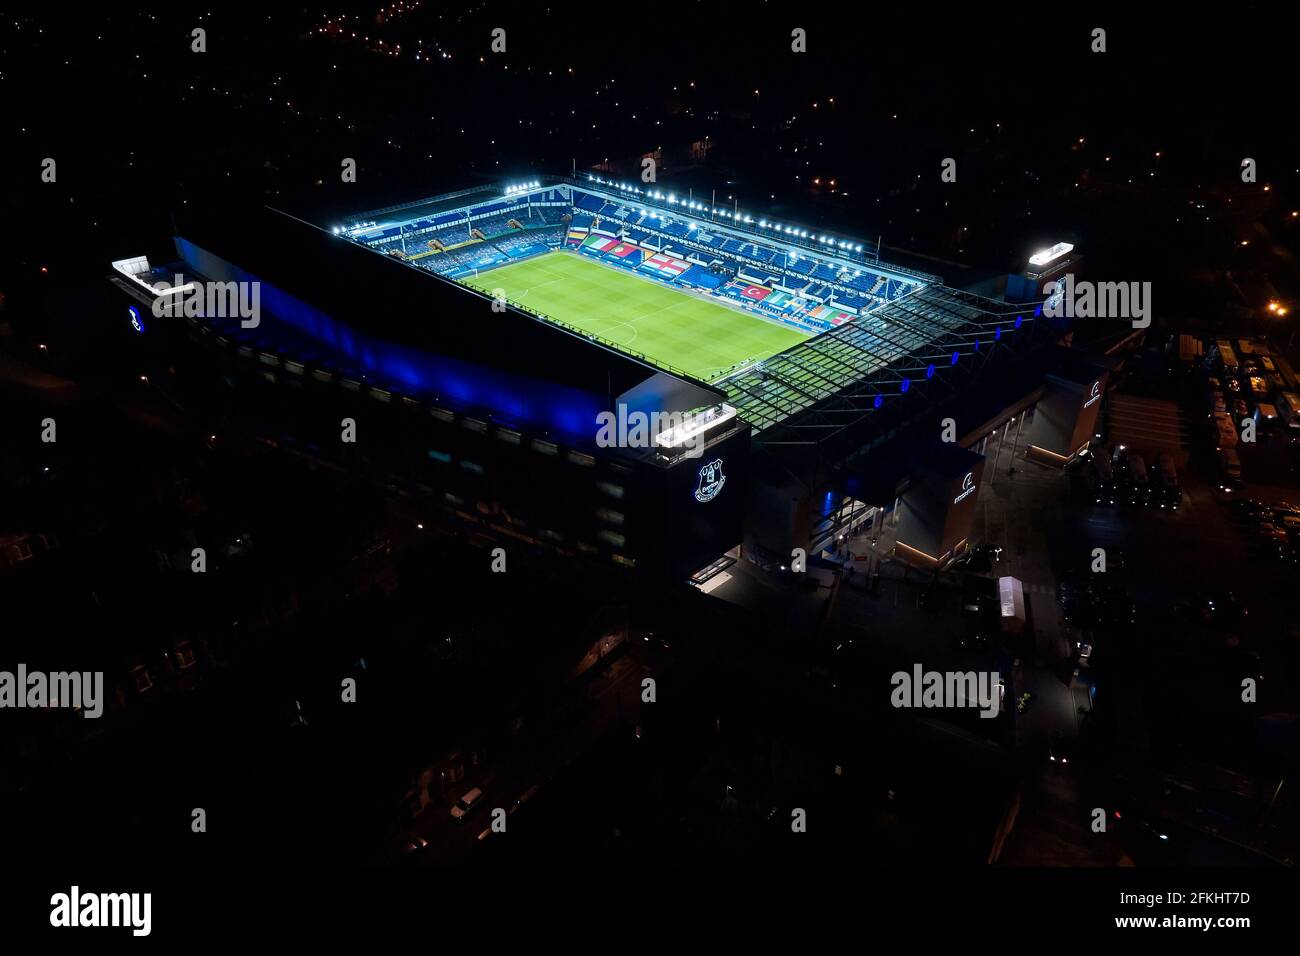 A general view of Goodison Park at night with the floodlights on after a football match showing the stadium in it’s urban setting Stock Photo